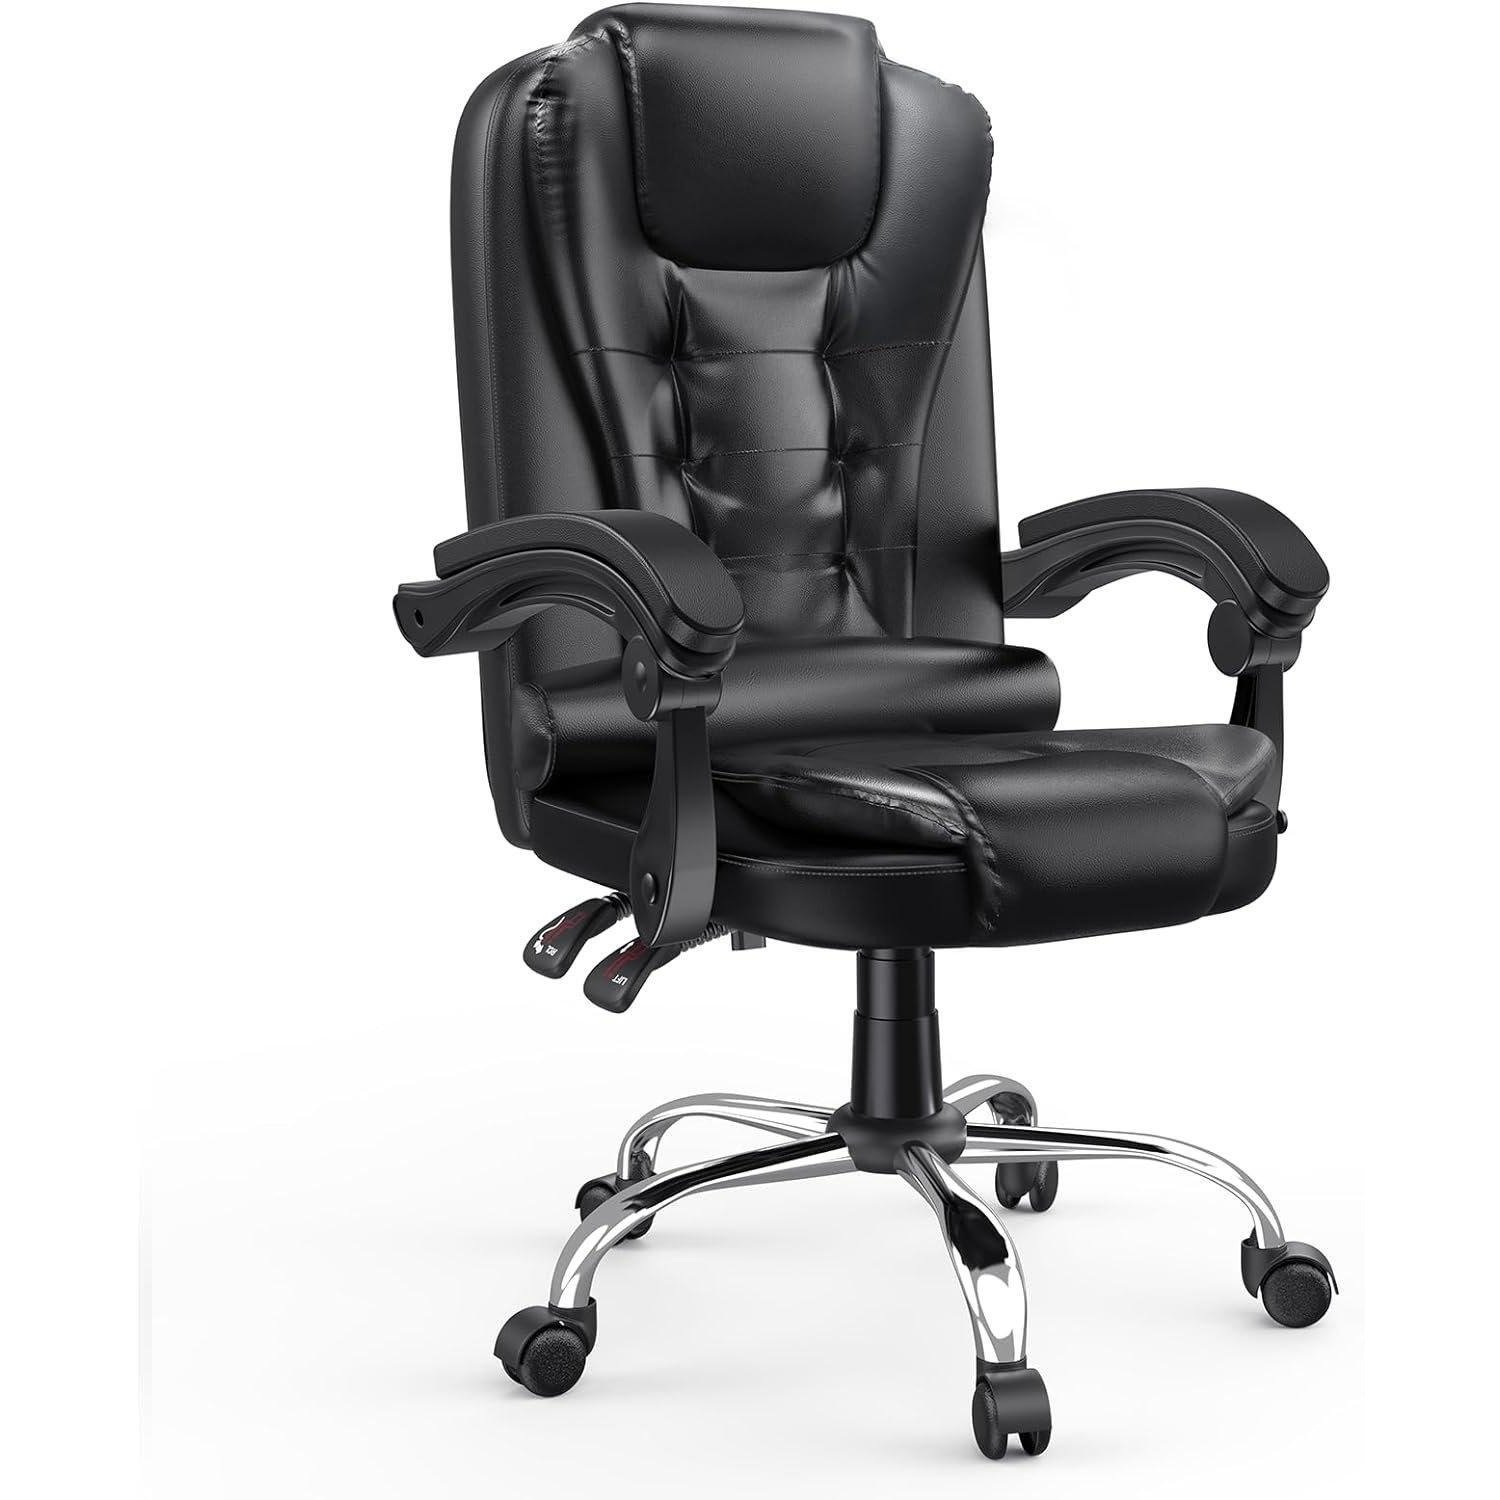 Premium Ergonomic Recliner Office Chair - Tailored Comfort for Home Office Productivity - image 1